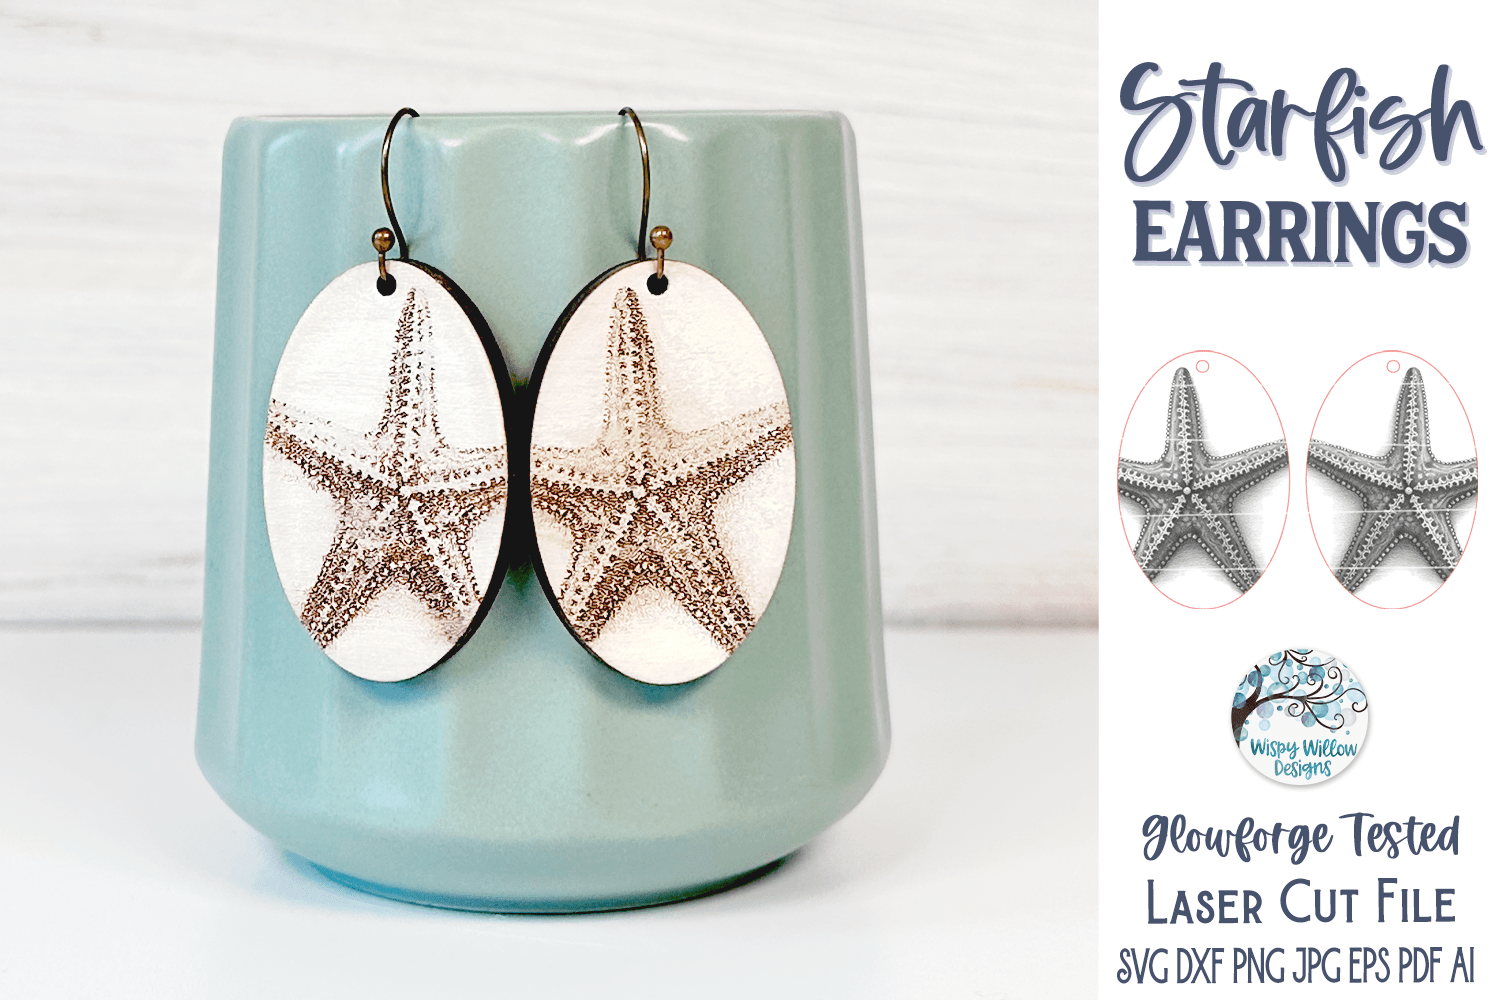 Starfish Earring File for Glowforge or Laser Cutter Wispy Willow Designs Company